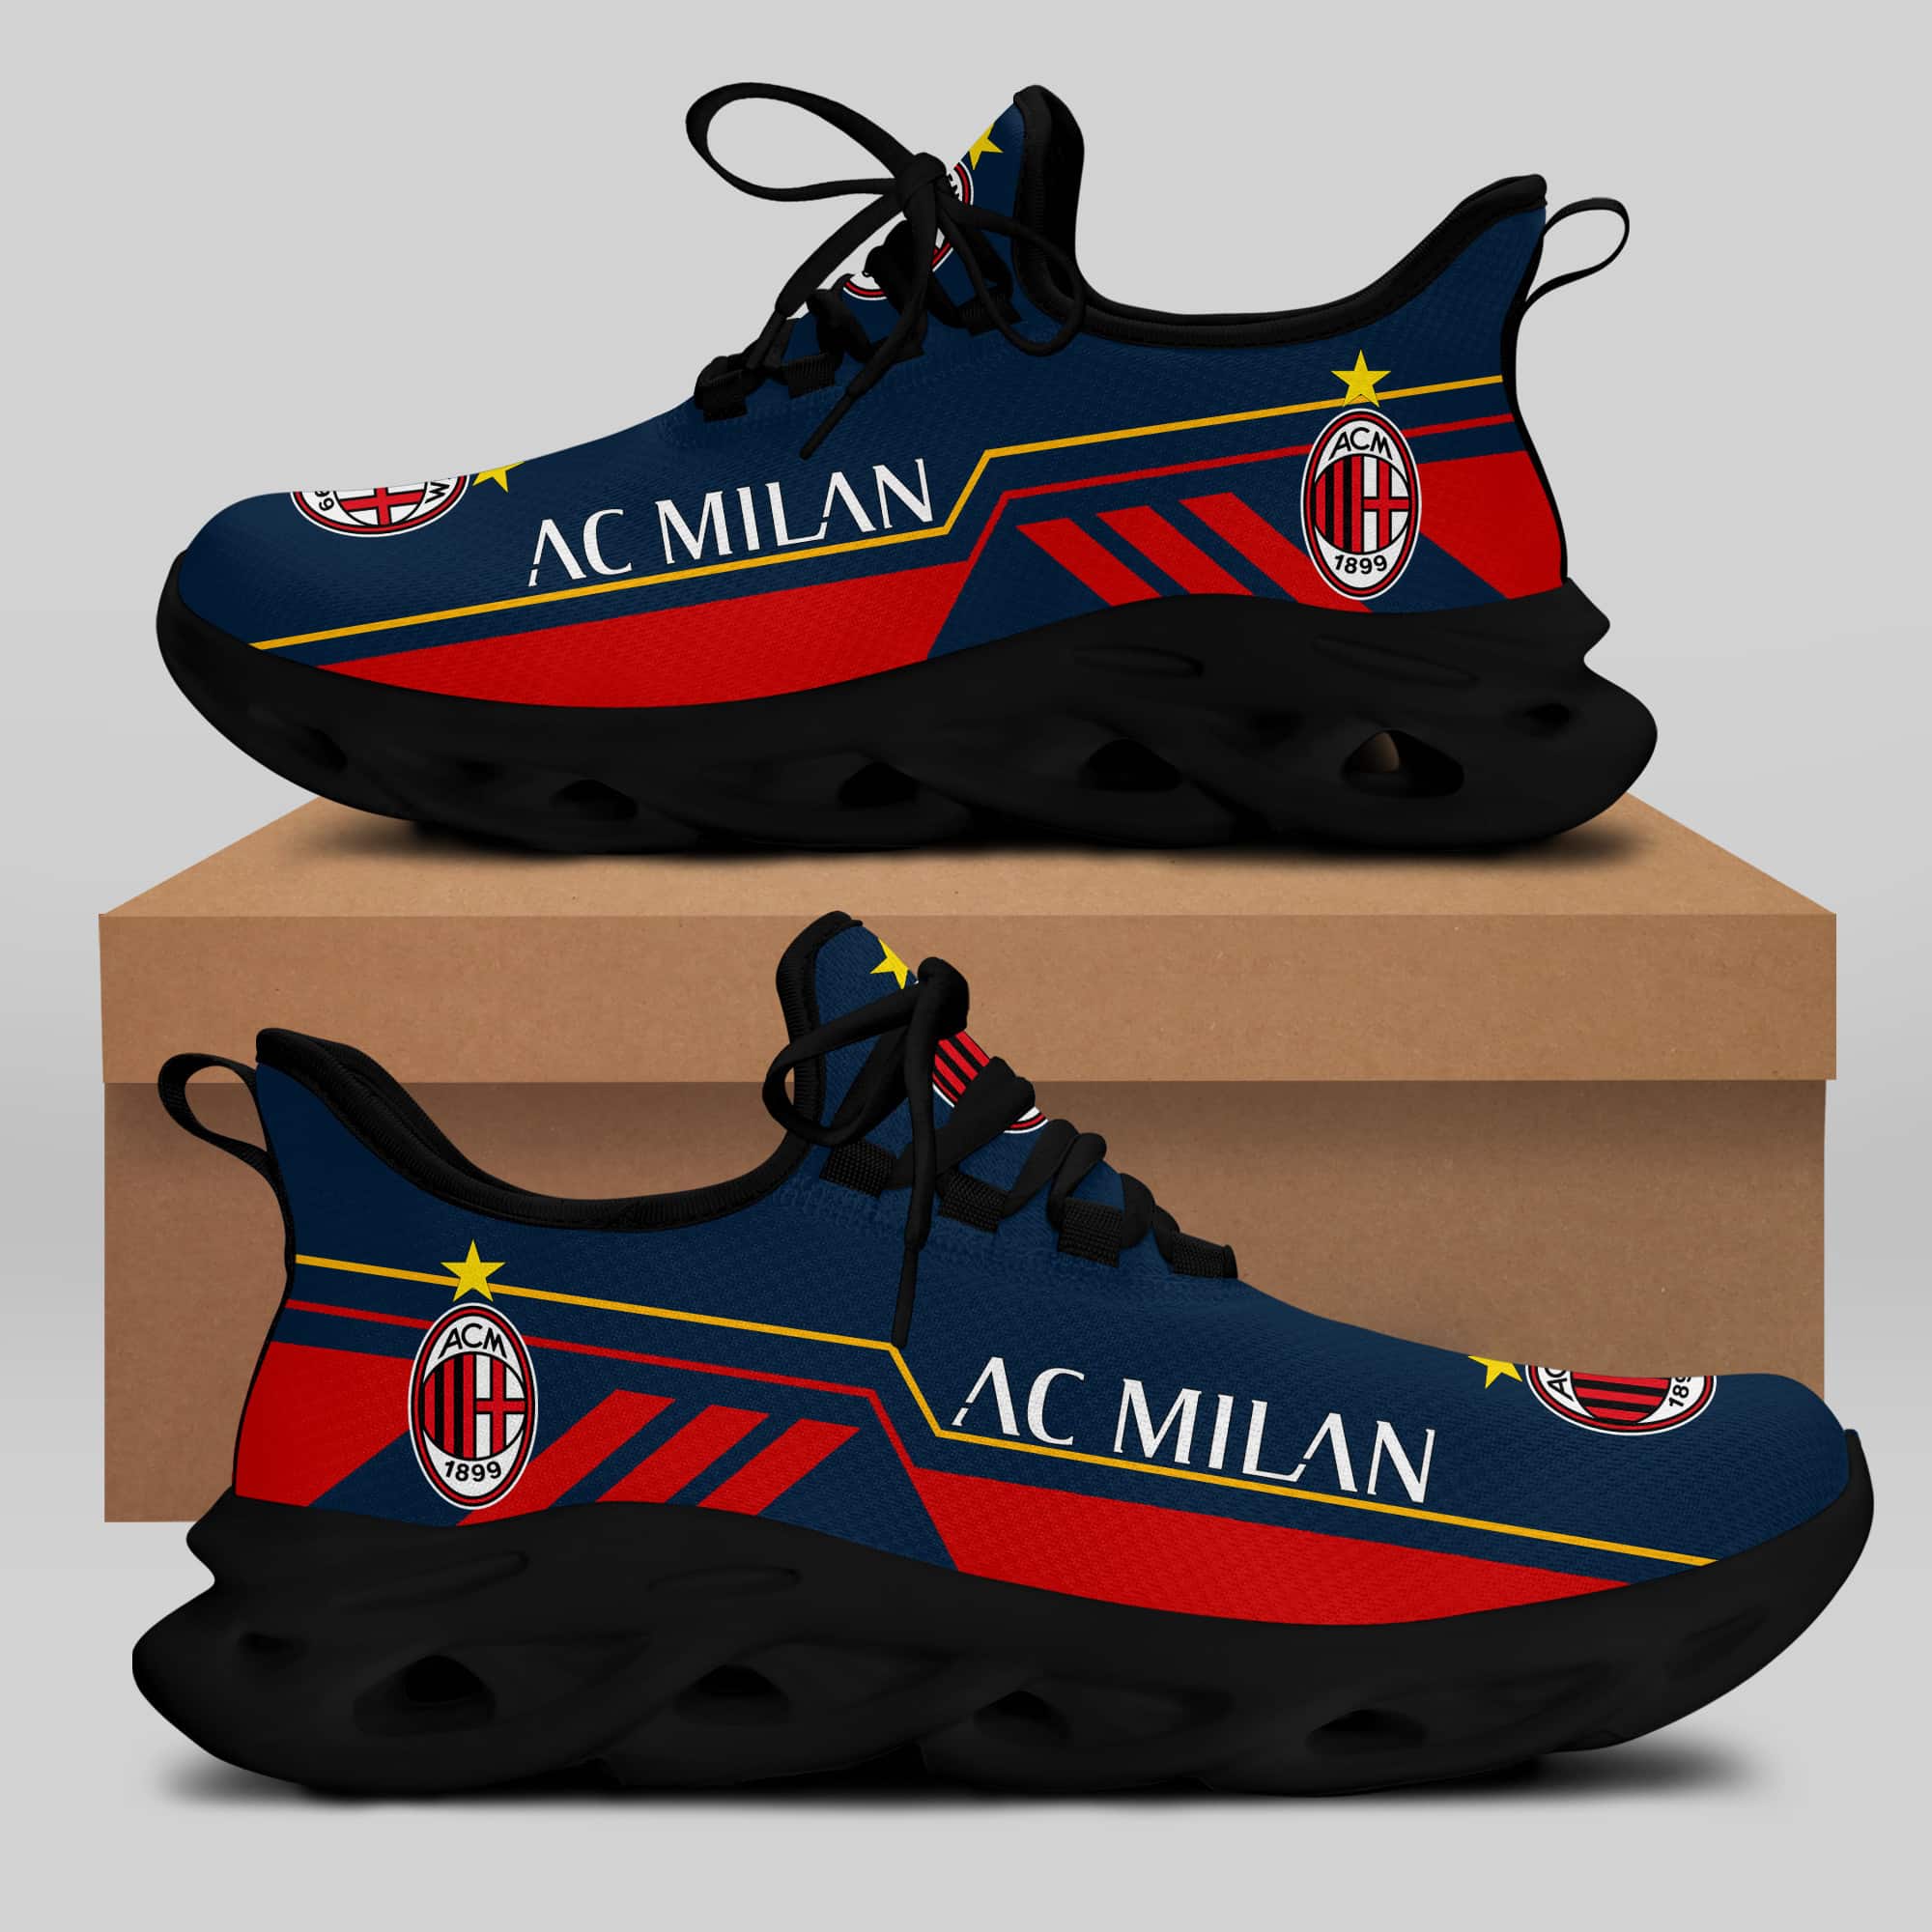 Ac Milan Running Shoes Max Soul Shoes Sneakers Ver 12 1